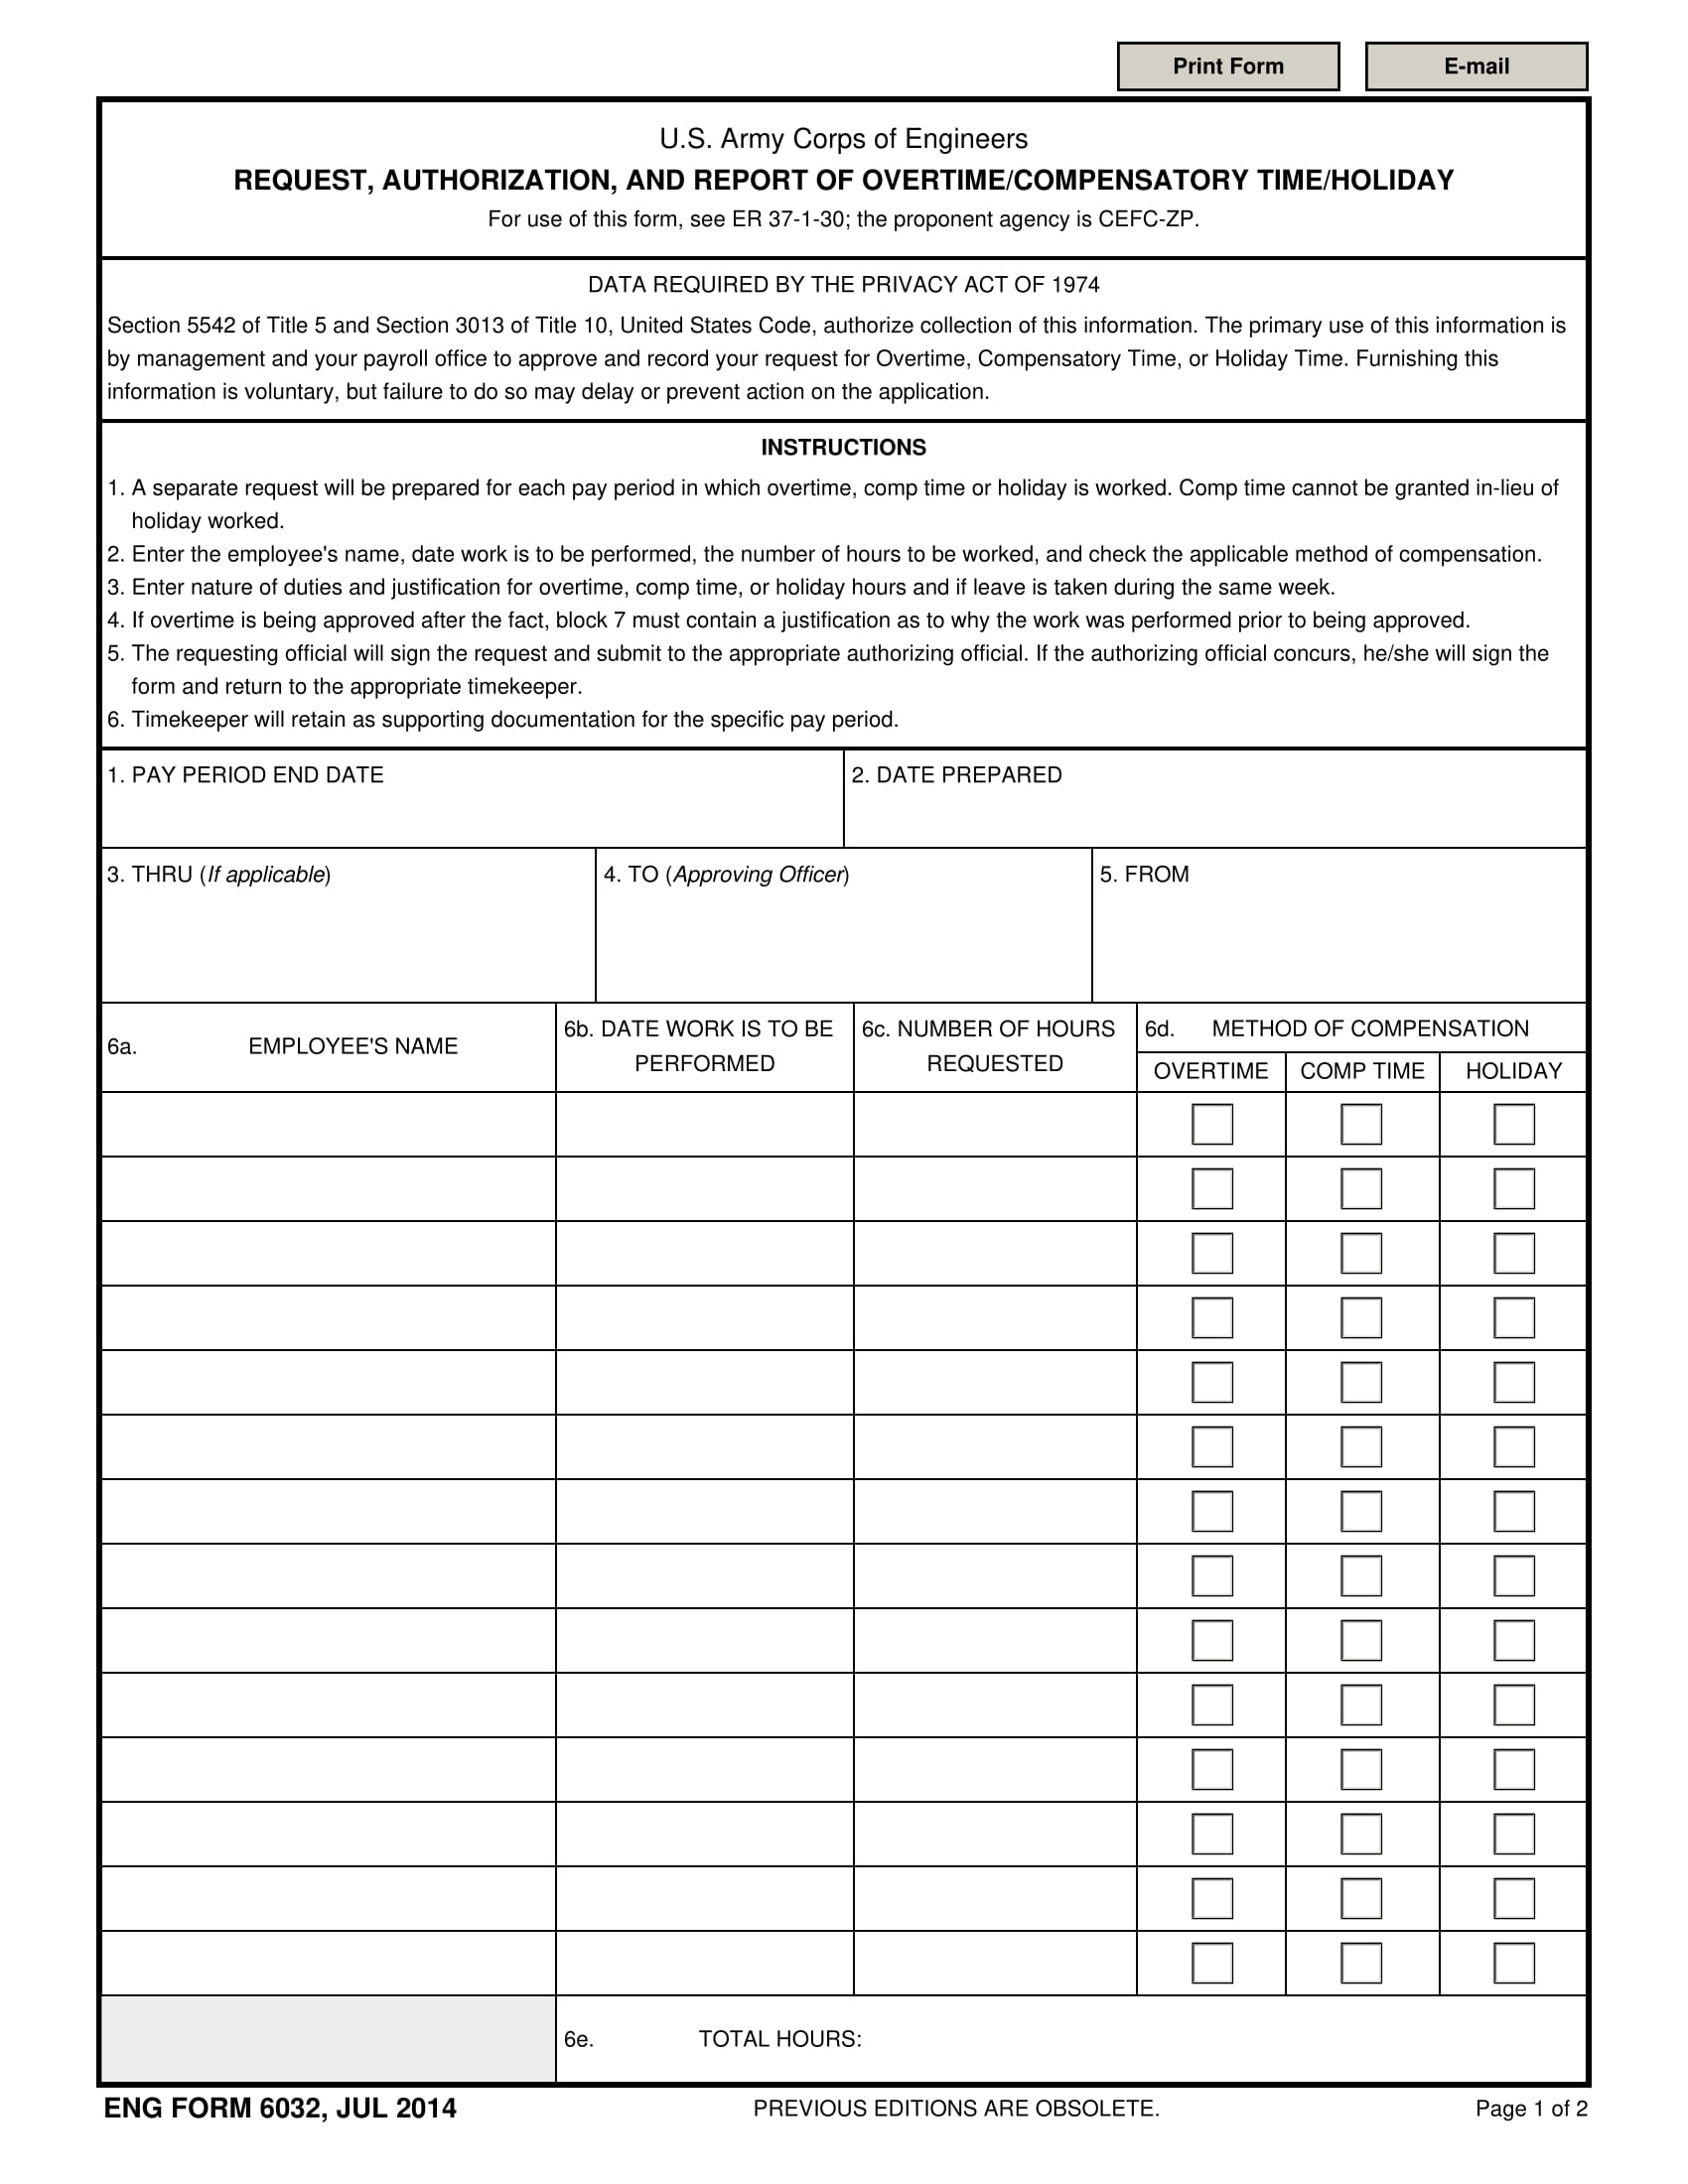 request authorization and report of overtime example